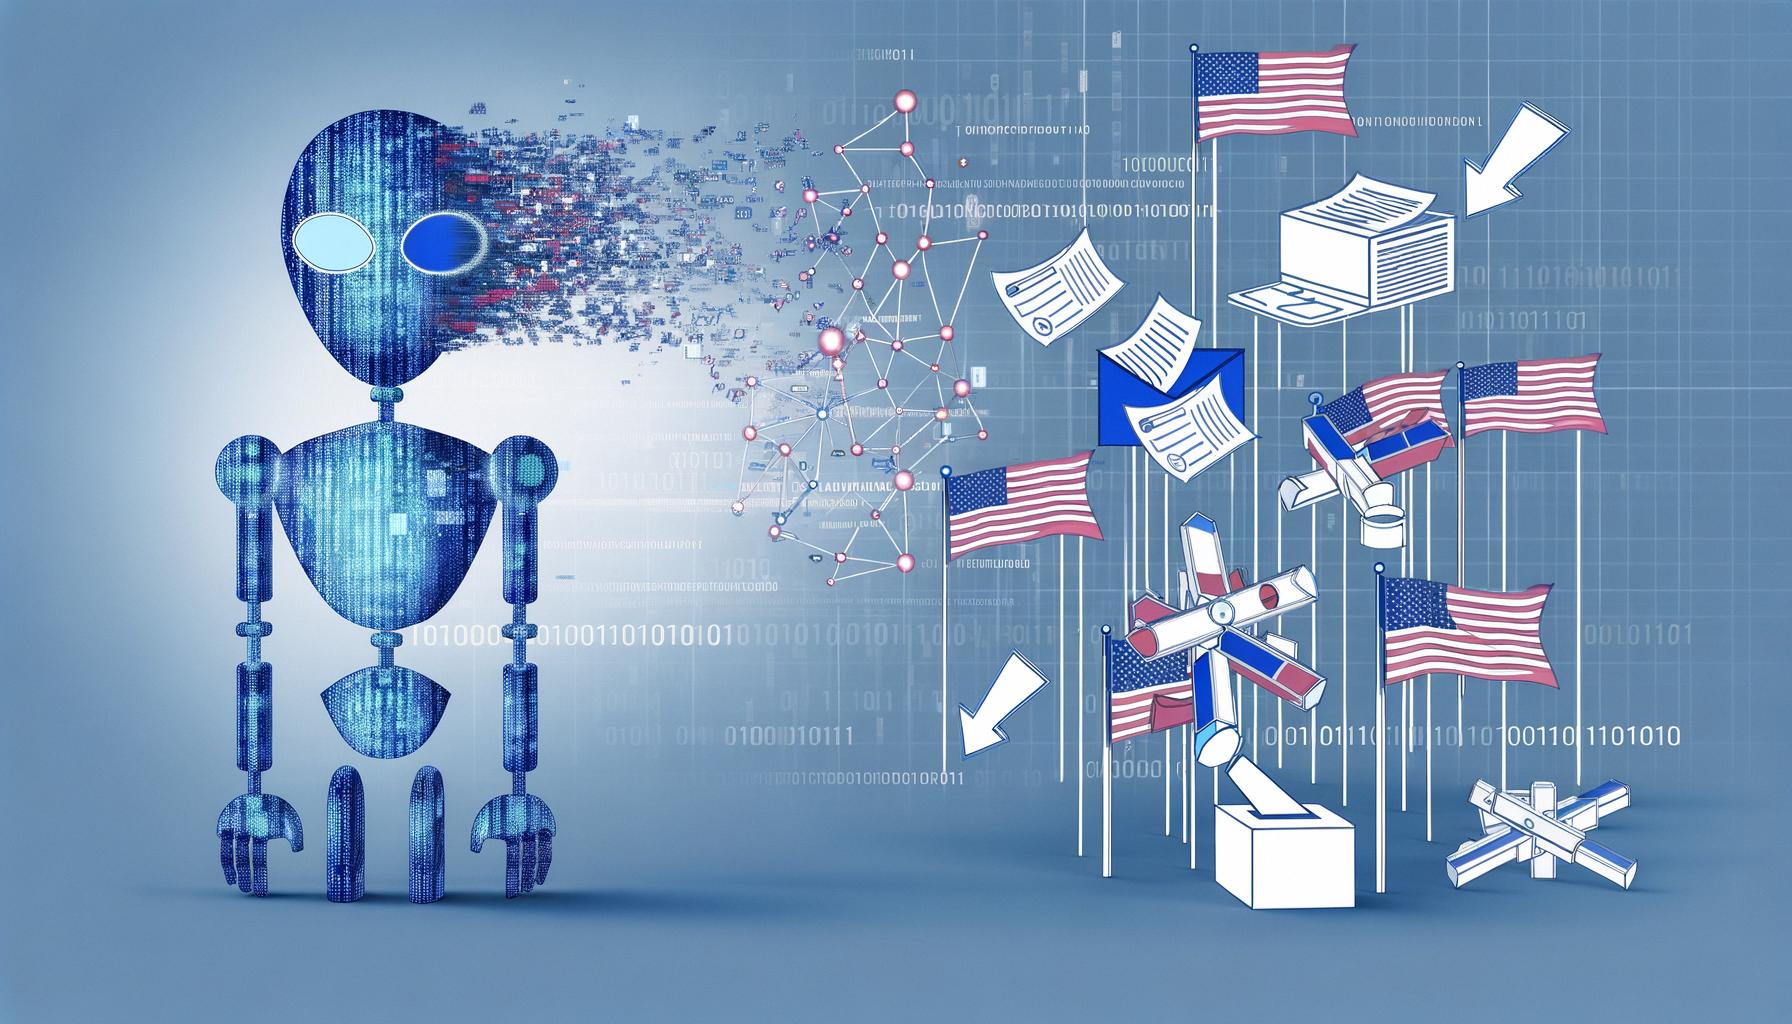 AI tools generate election-related disinformation Balanced News